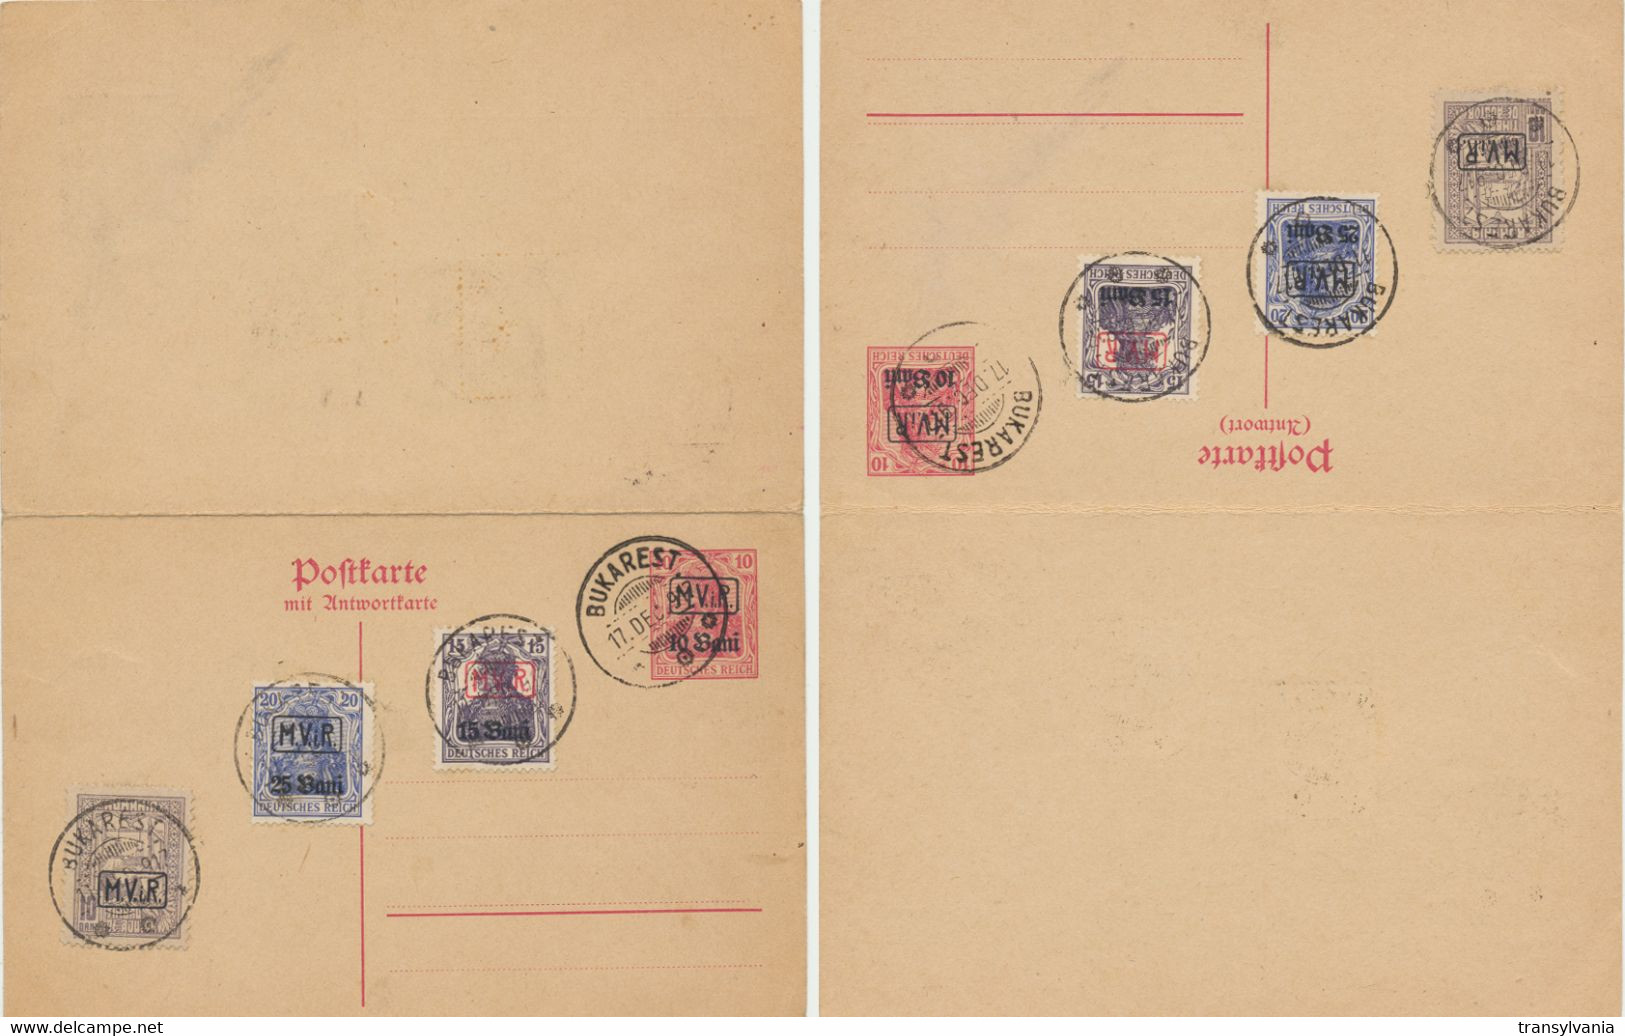 Romania WW1 Germany Occupation Double Stationery Card With MViR Overprinted Stamps Used As Philatelic Souvenir - Occupations